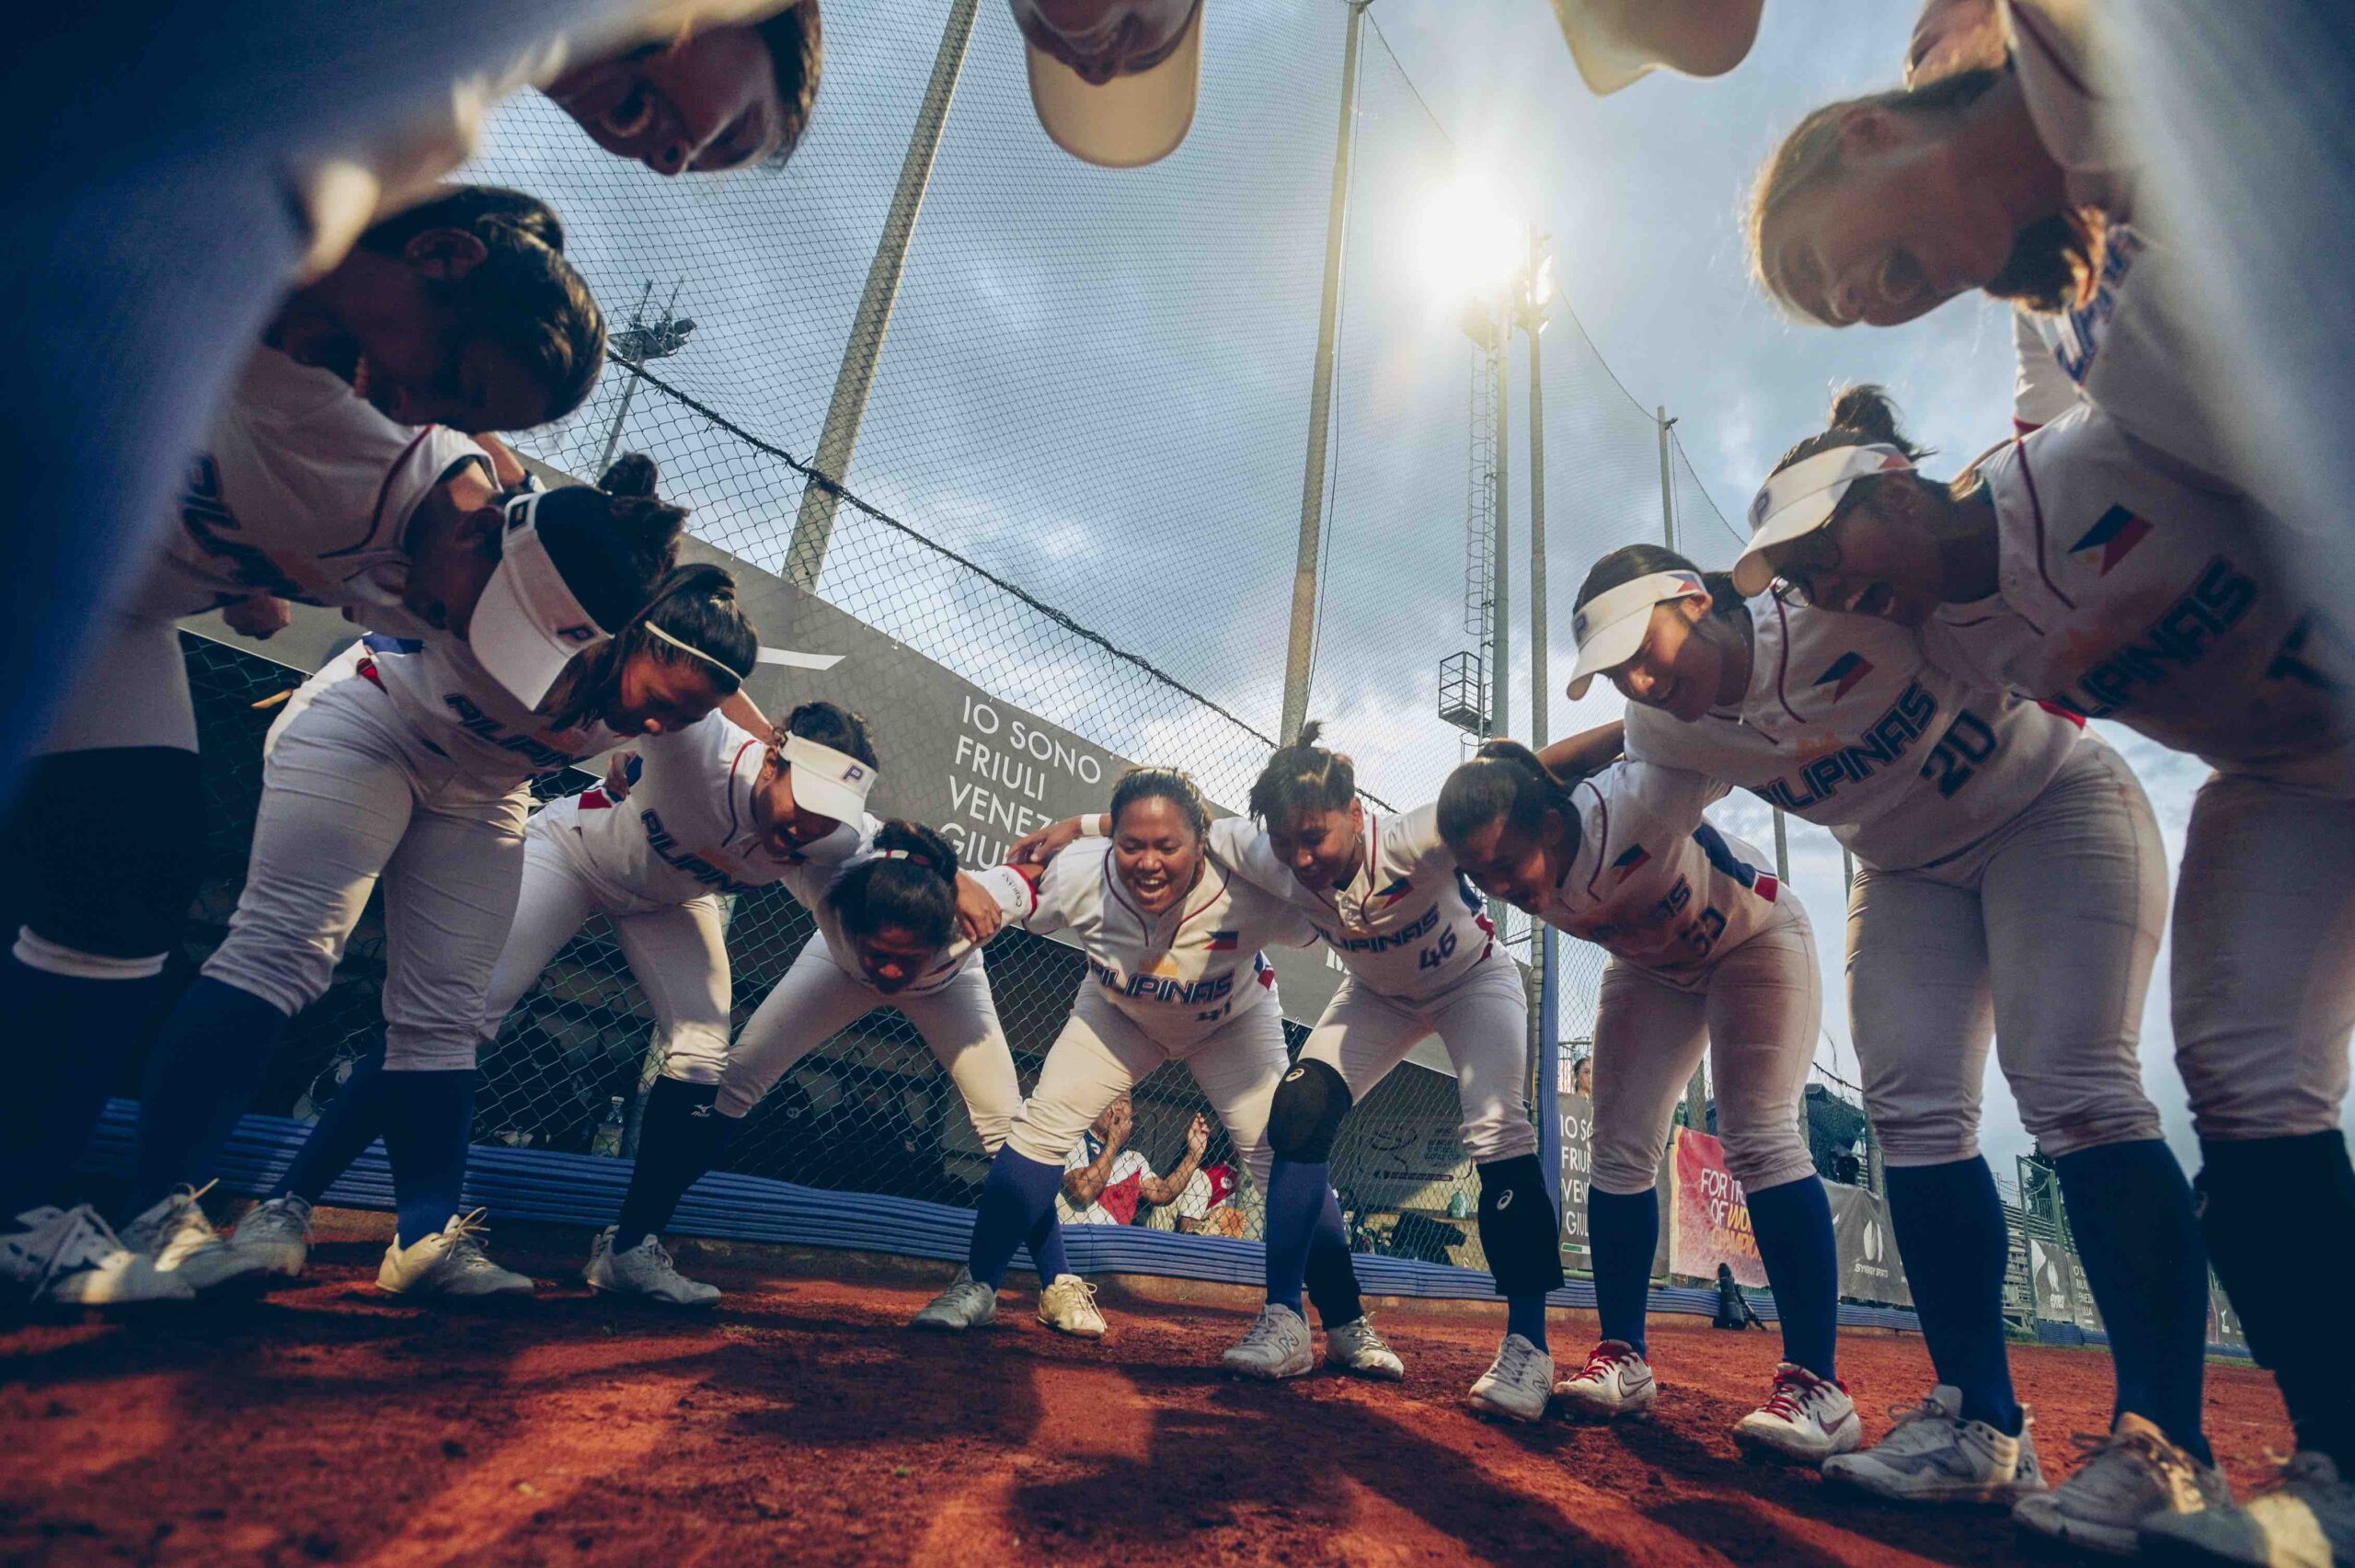 The Philippines at the 2023 Softball Women's World Cup